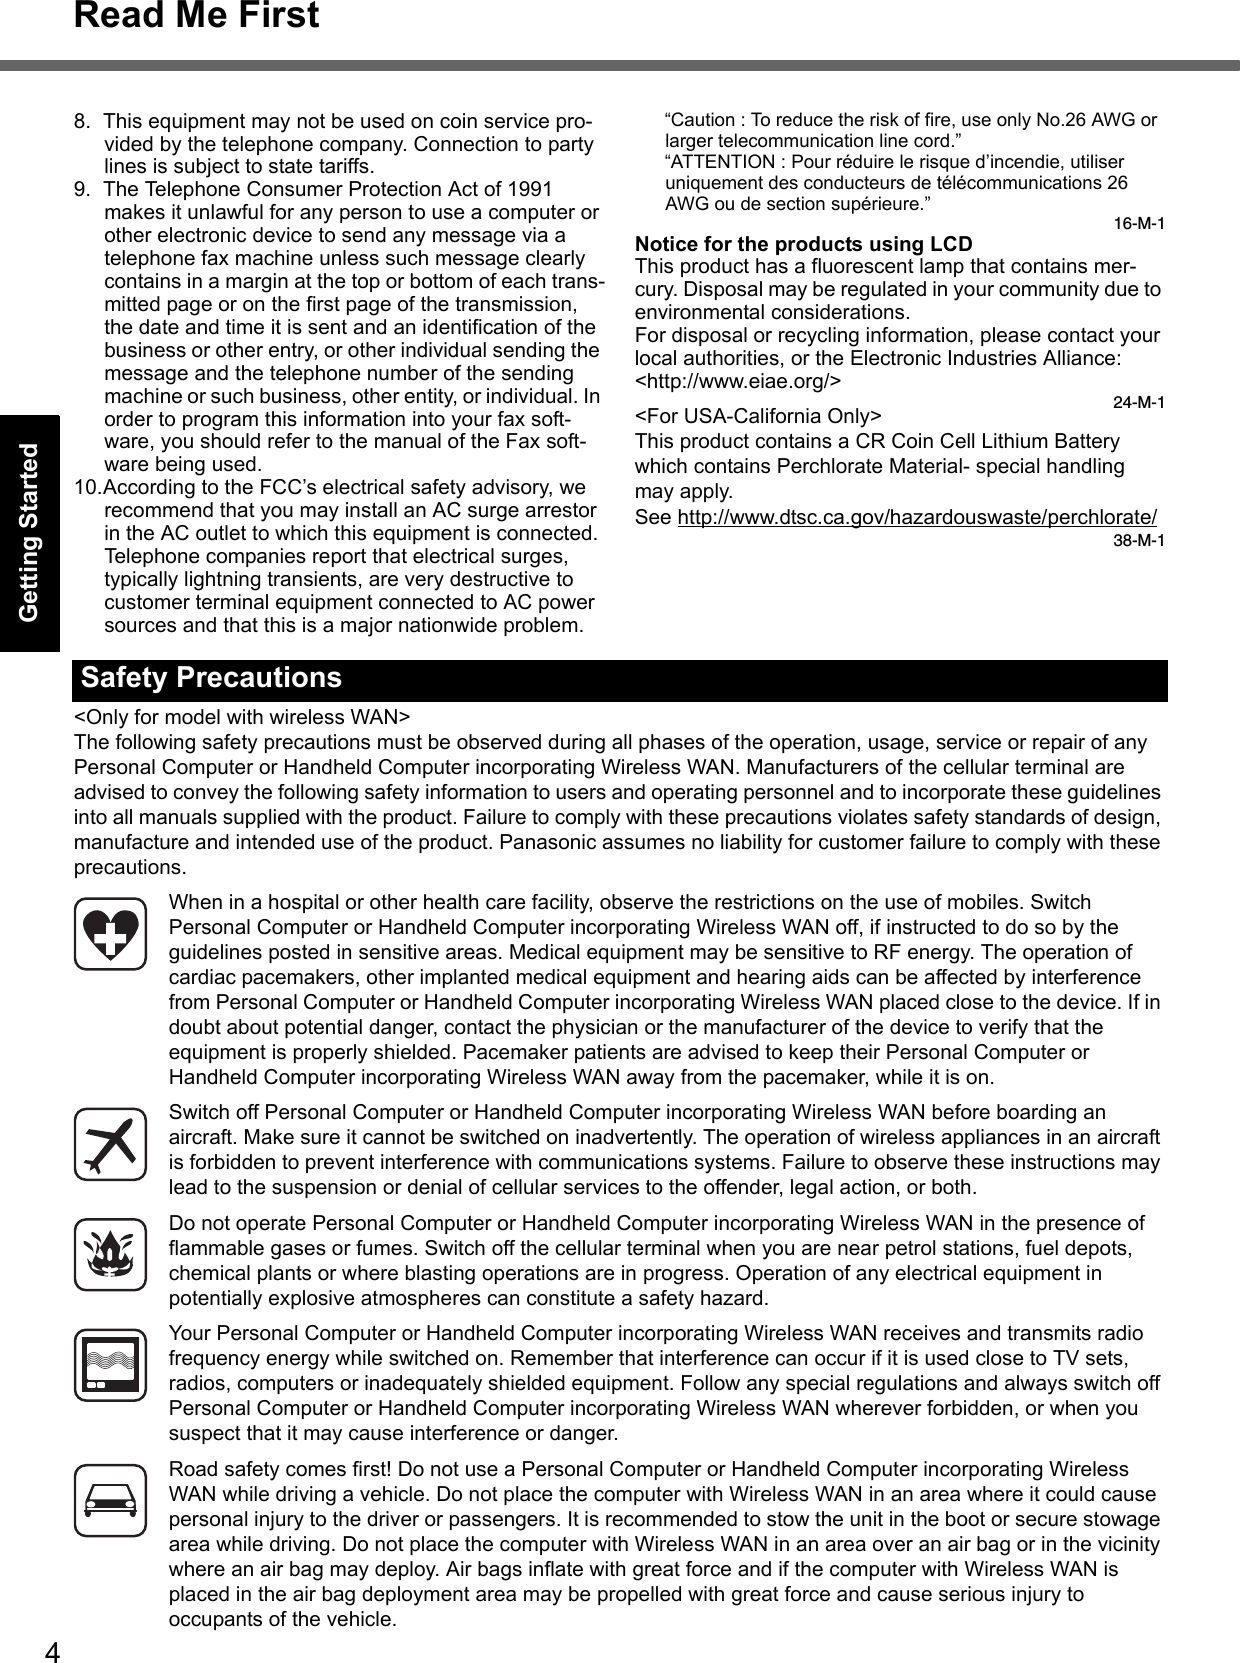 4Read Me FirstGetting StartedUseful InformationTroubleshootingAppendix8. This equipment may not be used on coin service pro-vided by the telephone company. Connection to party lines is subject to state tariffs.9. The Telephone Consumer Protection Act of 1991 makes it unlawful for any person to use a computer or other electronic device to send any message via a telephone fax machine unless such message clearly contains in a margin at the top or bottom of each trans-mitted page or on the first page of the transmission, the date and time it is sent and an identification of the business or other entry, or other individual sending the message and the telephone number of the sending machine or such business, other entity, or individual. In order to program this information into your fax soft-ware, you should refer to the manual of the Fax soft-ware being used.10.According to the FCC’s electrical safety advisory, we recommend that you may install an AC surge arrestor in the AC outlet to which this equipment is connected. Telephone companies report that electrical surges, typically lightning transients, are very destructive to customer terminal equipment connected to AC power sources and that this is a major nationwide problem.“Caution : To reduce the risk of fire, use only No.26 AWG or larger telecommunication line cord.”“ATTENTION : Pour réduire le risque d’incendie, utiliser uniquement des conducteurs de télécommunications 26 AWG ou de section supérieure.”16-M-1Notice for the products using LCDThis product has a fluorescent lamp that contains mer-cury. Disposal may be regulated in your community due to environmental considerations. For disposal or recycling information, please contact your local authorities, or the Electronic Industries Alliance: &lt;http://www.eiae.org/&gt;24-M-1&lt;For USA-California Only&gt;This product contains a CR Coin Cell Lithium Battery which contains Perchlorate Material- special handling may apply.See http://www.dtsc.ca.gov/hazardouswaste/perchlorate/38-M-1&lt;Only for model with wireless WAN&gt;The following safety precautions must be observed during all phases of the operation, usage, service or repair of any Personal Computer or Handheld Computer incorporating Wireless WAN. Manufacturers of the cellular terminal are advised to convey the following safety information to users and operating personnel and to incorporate these guidelines into all manuals supplied with the product. Failure to comply with these precautions violates safety standards of design, manufacture and intended use of the product. Panasonic assumes no liability for customer failure to comply with these precautions.When in a hospital or other health care facility, observe the restrictions on the use of mobiles. Switch Personal Computer or Handheld Computer incorporating Wireless WAN off, if instructed to do so by the guidelines posted in sensitive areas. Medical equipment may be sensitive to RF energy. The operation of cardiac pacemakers, other implanted medical equipment and hearing aids can be affected by interference from Personal Computer or Handheld Computer incorporating Wireless WAN placed close to the device. If in doubt about potential danger, contact the physician or the manufacturer of the device to verify that the equipment is properly shielded. Pacemaker patients are advised to keep their Personal Computer or Handheld Computer incorporating Wireless WAN away from the pacemaker, while it is on.Switch off Personal Computer or Handheld Computer incorporating Wireless WAN before boarding an aircraft. Make sure it cannot be switched on inadvertently. The operation of wireless appliances in an aircraft is forbidden to prevent interference with communications systems. Failure to observe these instructions may lead to the suspension or denial of cellular services to the offender, legal action, or both.Do not operate Personal Computer or Handheld Computer incorporating Wireless WAN in the presence of flammable gases or fumes. Switch off the cellular terminal when you are near petrol stations, fuel depots, chemical plants or where blasting operations are in progress. Operation of any electrical equipment in potentially explosive atmospheres can constitute a safety hazard.Your Personal Computer or Handheld Computer incorporating Wireless WAN receives and transmits radio frequency energy while switched on. Remember that interference can occur if it is used close to TV sets, radios, computers or inadequately shielded equipment. Follow any special regulations and always switch off Personal Computer or Handheld Computer incorporating Wireless WAN wherever forbidden, or when you suspect that it may cause interference or danger.Road safety comes first! Do not use a Personal Computer or Handheld Computer incorporating Wireless WAN while driving a vehicle. Do not place the computer with Wireless WAN in an area where it could cause personal injury to the driver or passengers. It is recommended to stow the unit in the boot or secure stowage area while driving. Do not place the computer with Wireless WAN in an area over an air bag or in the vicinity where an air bag may deploy. Air bags inflate with great force and if the computer with Wireless WAN is placed in the air bag deployment area may be propelled with great force and cause serious injury to occupants of the vehicle.Safety Precautions